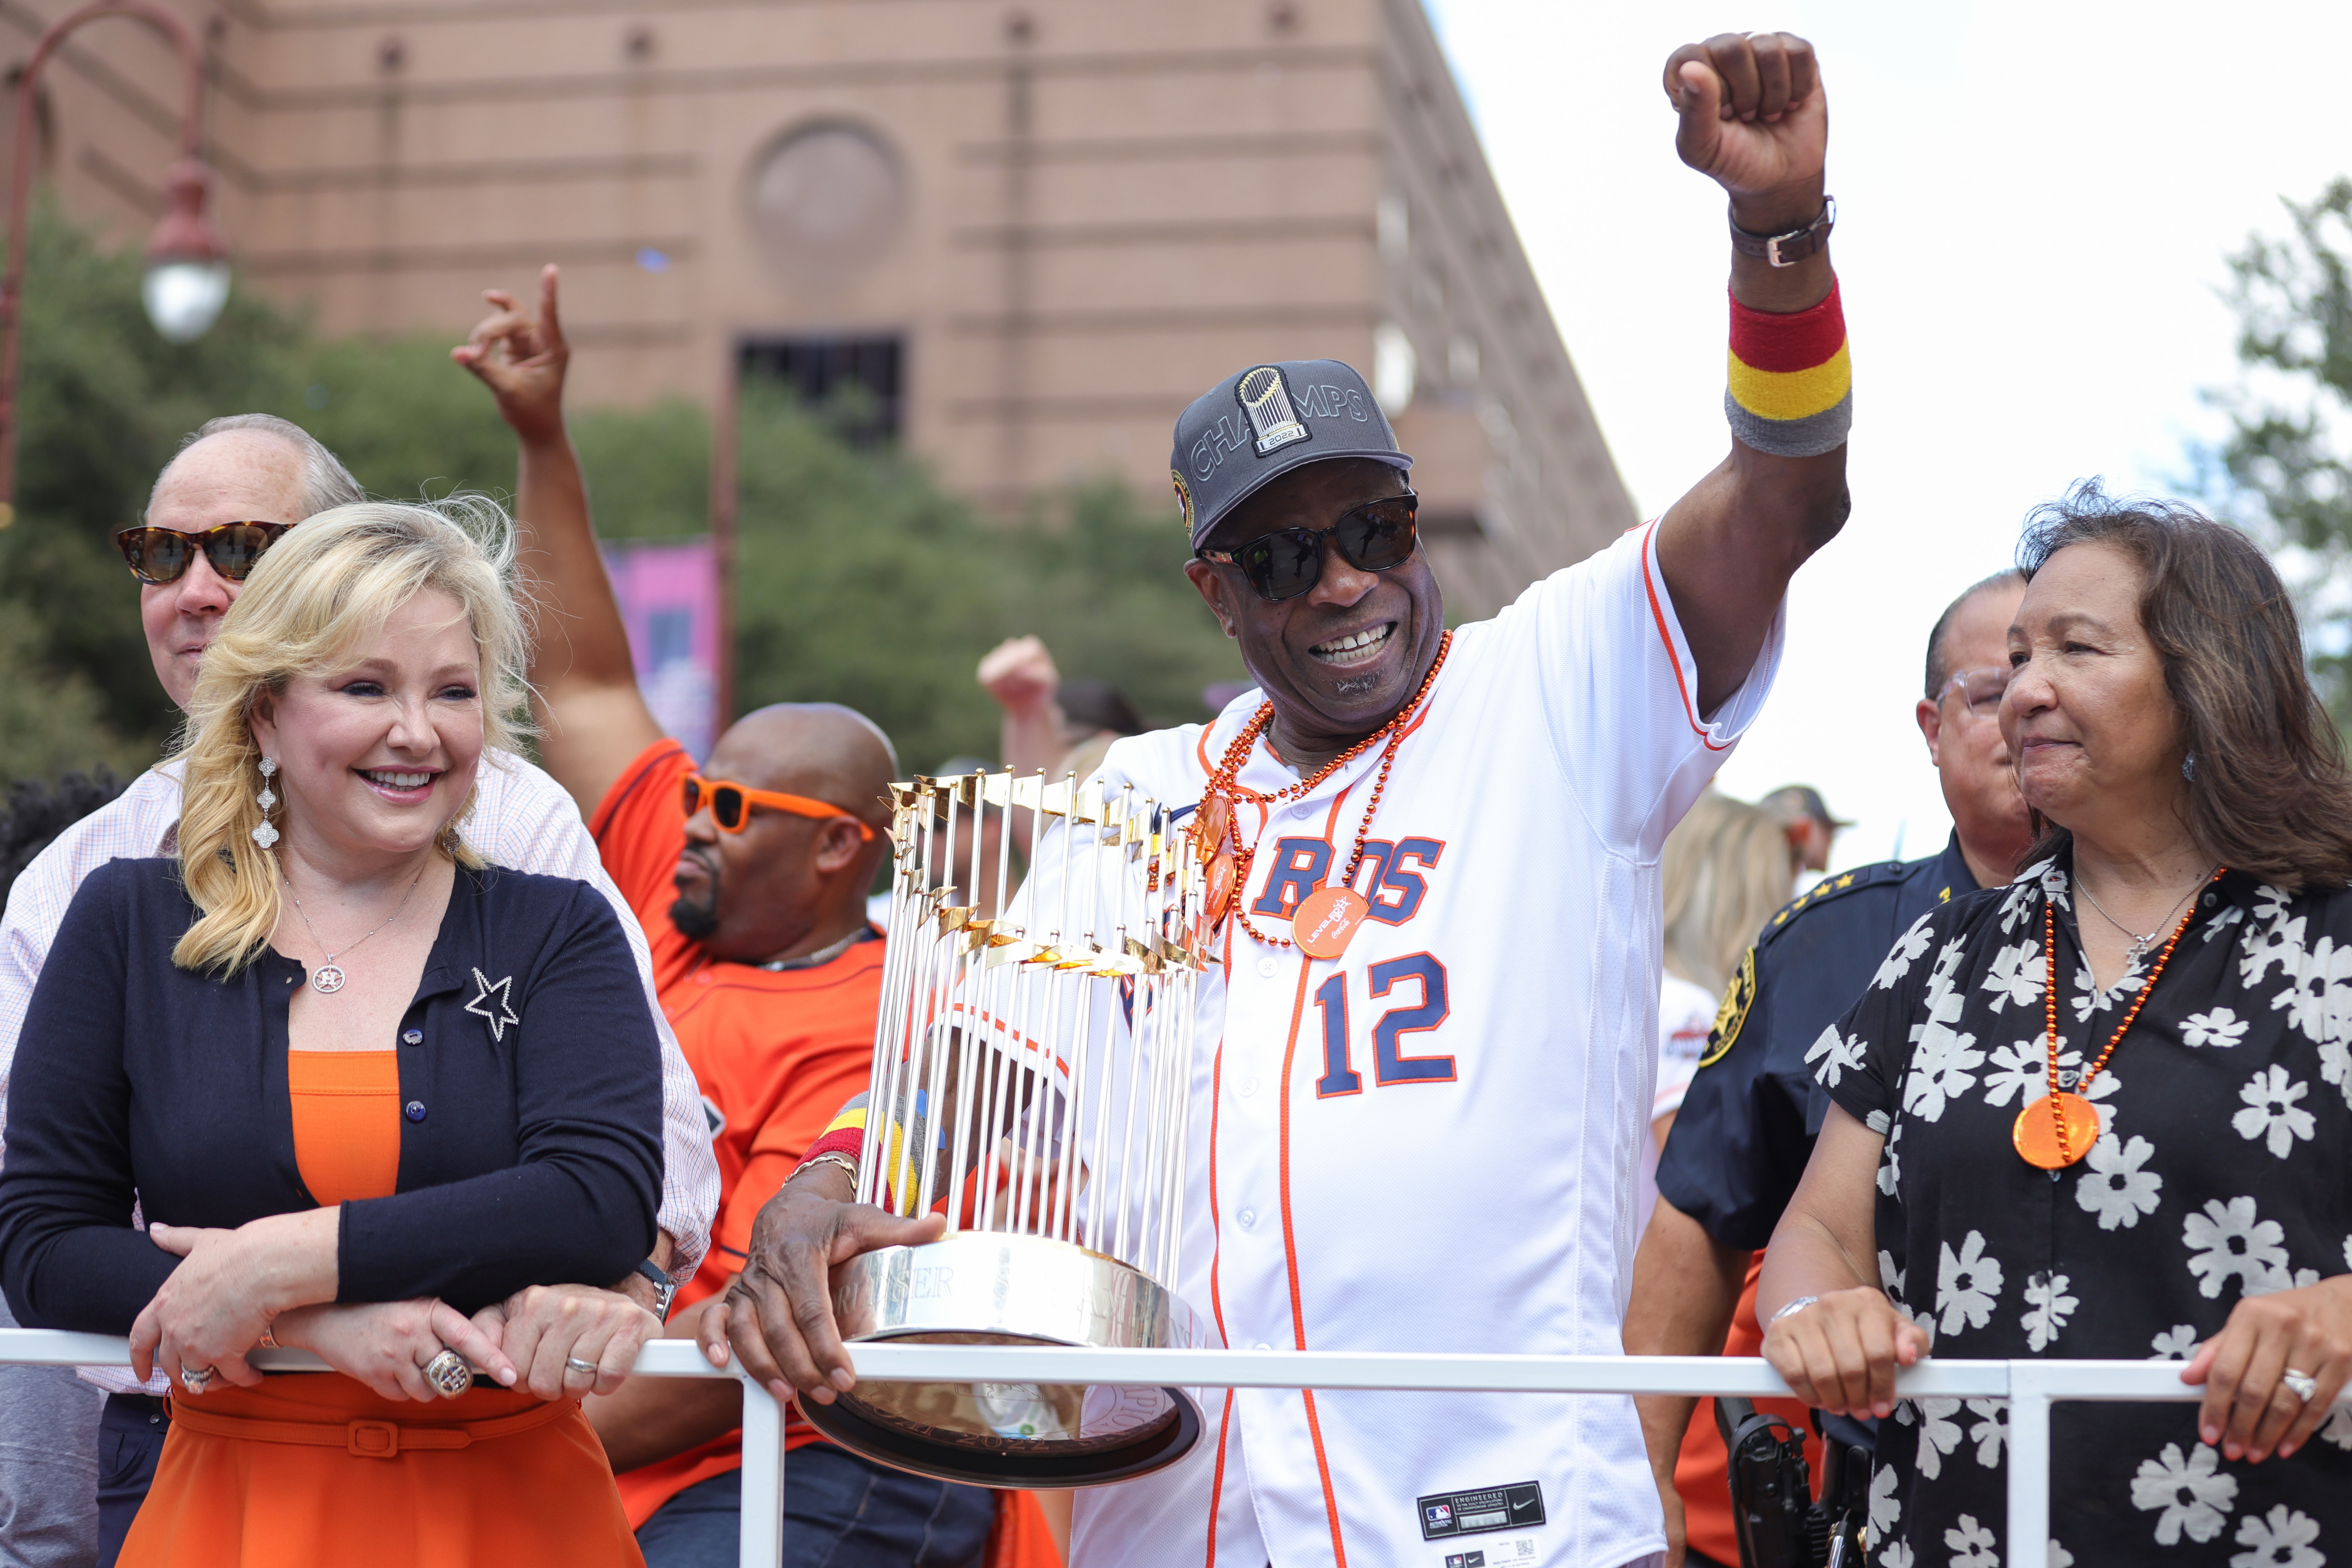 Mayor Turner Thanks Houston for Successful Astros Parade